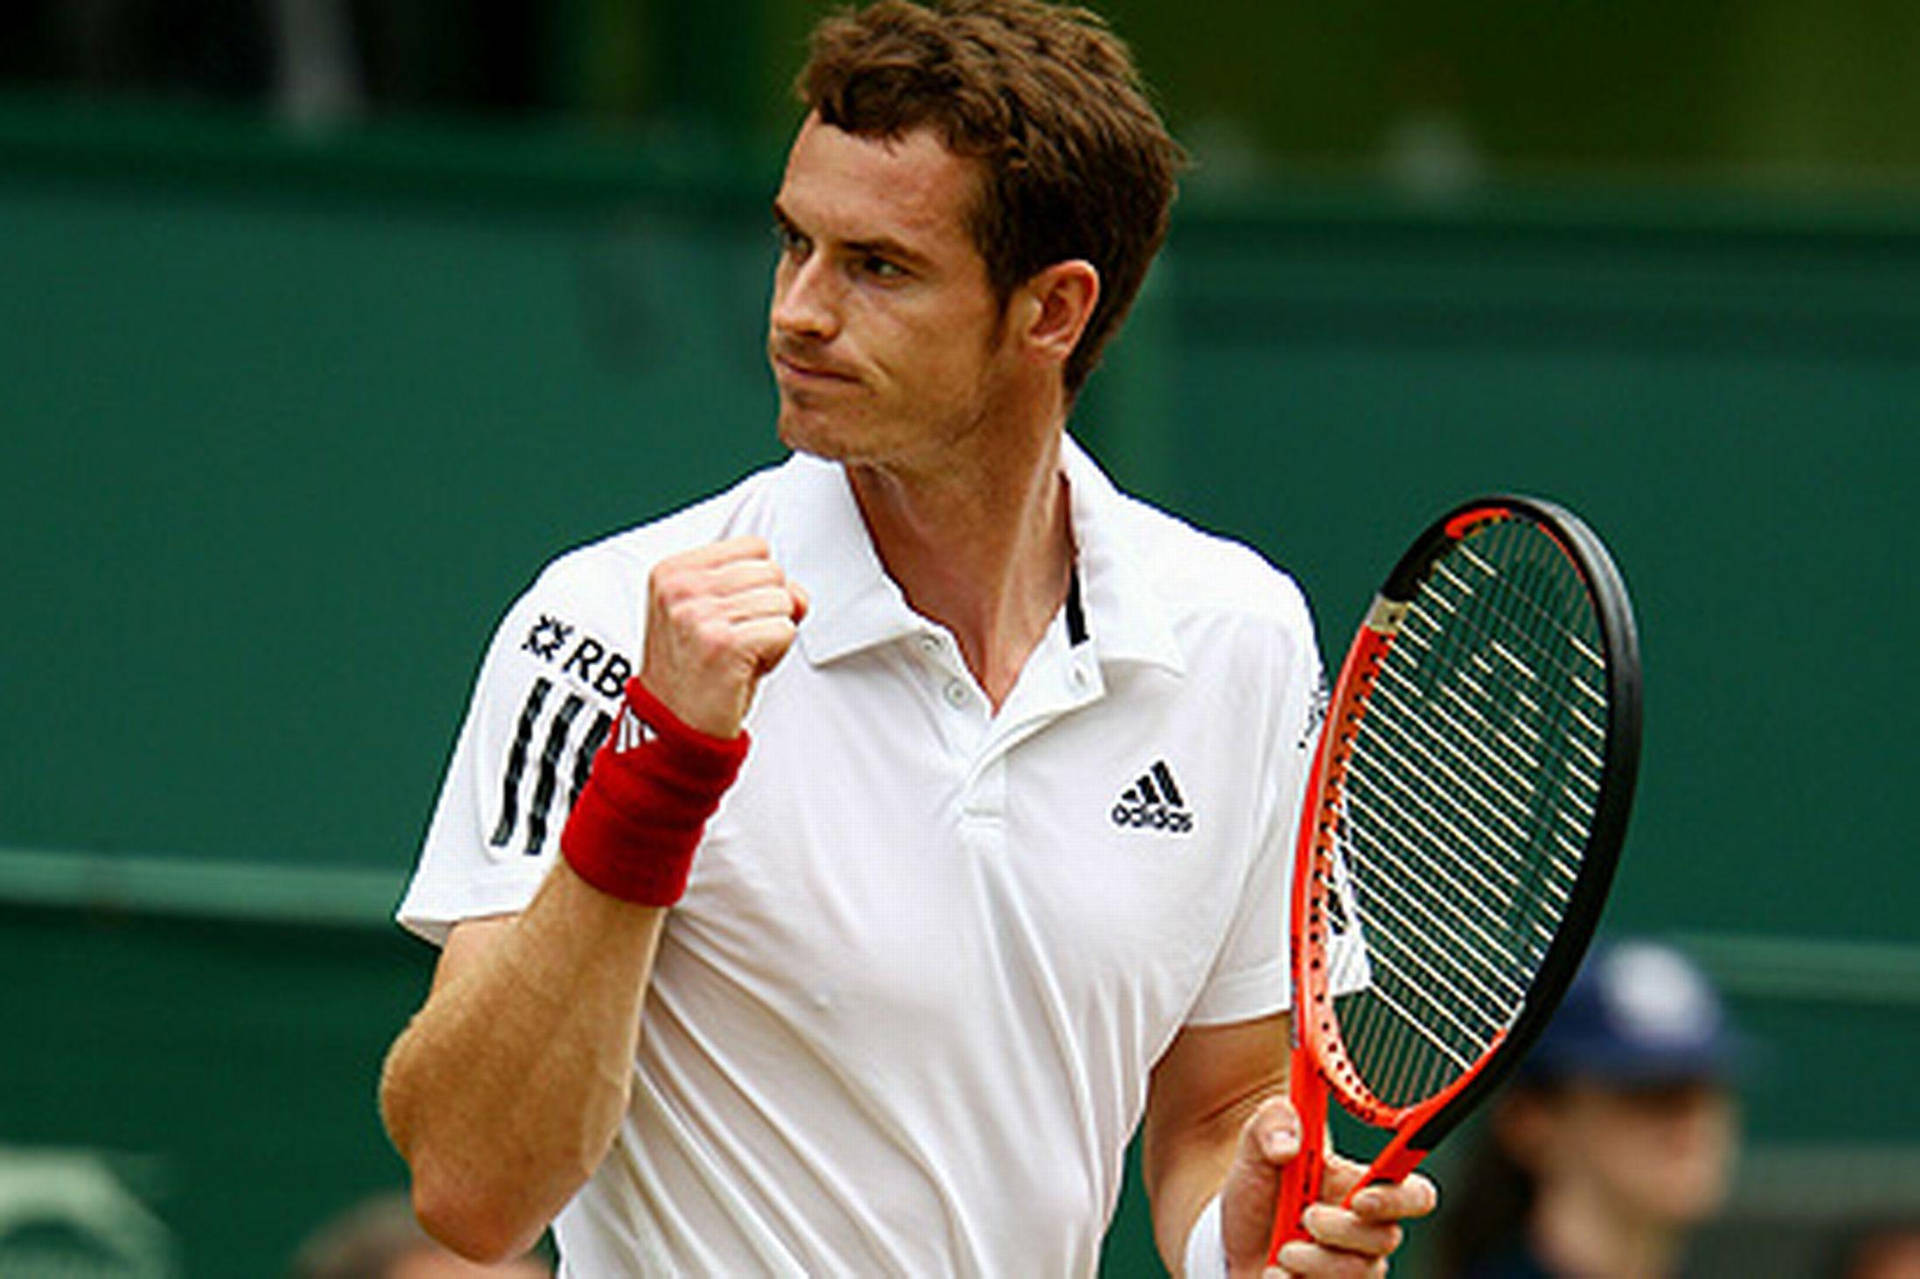 Tennis Prodigy Andy Murray In A Fierce Shot Background